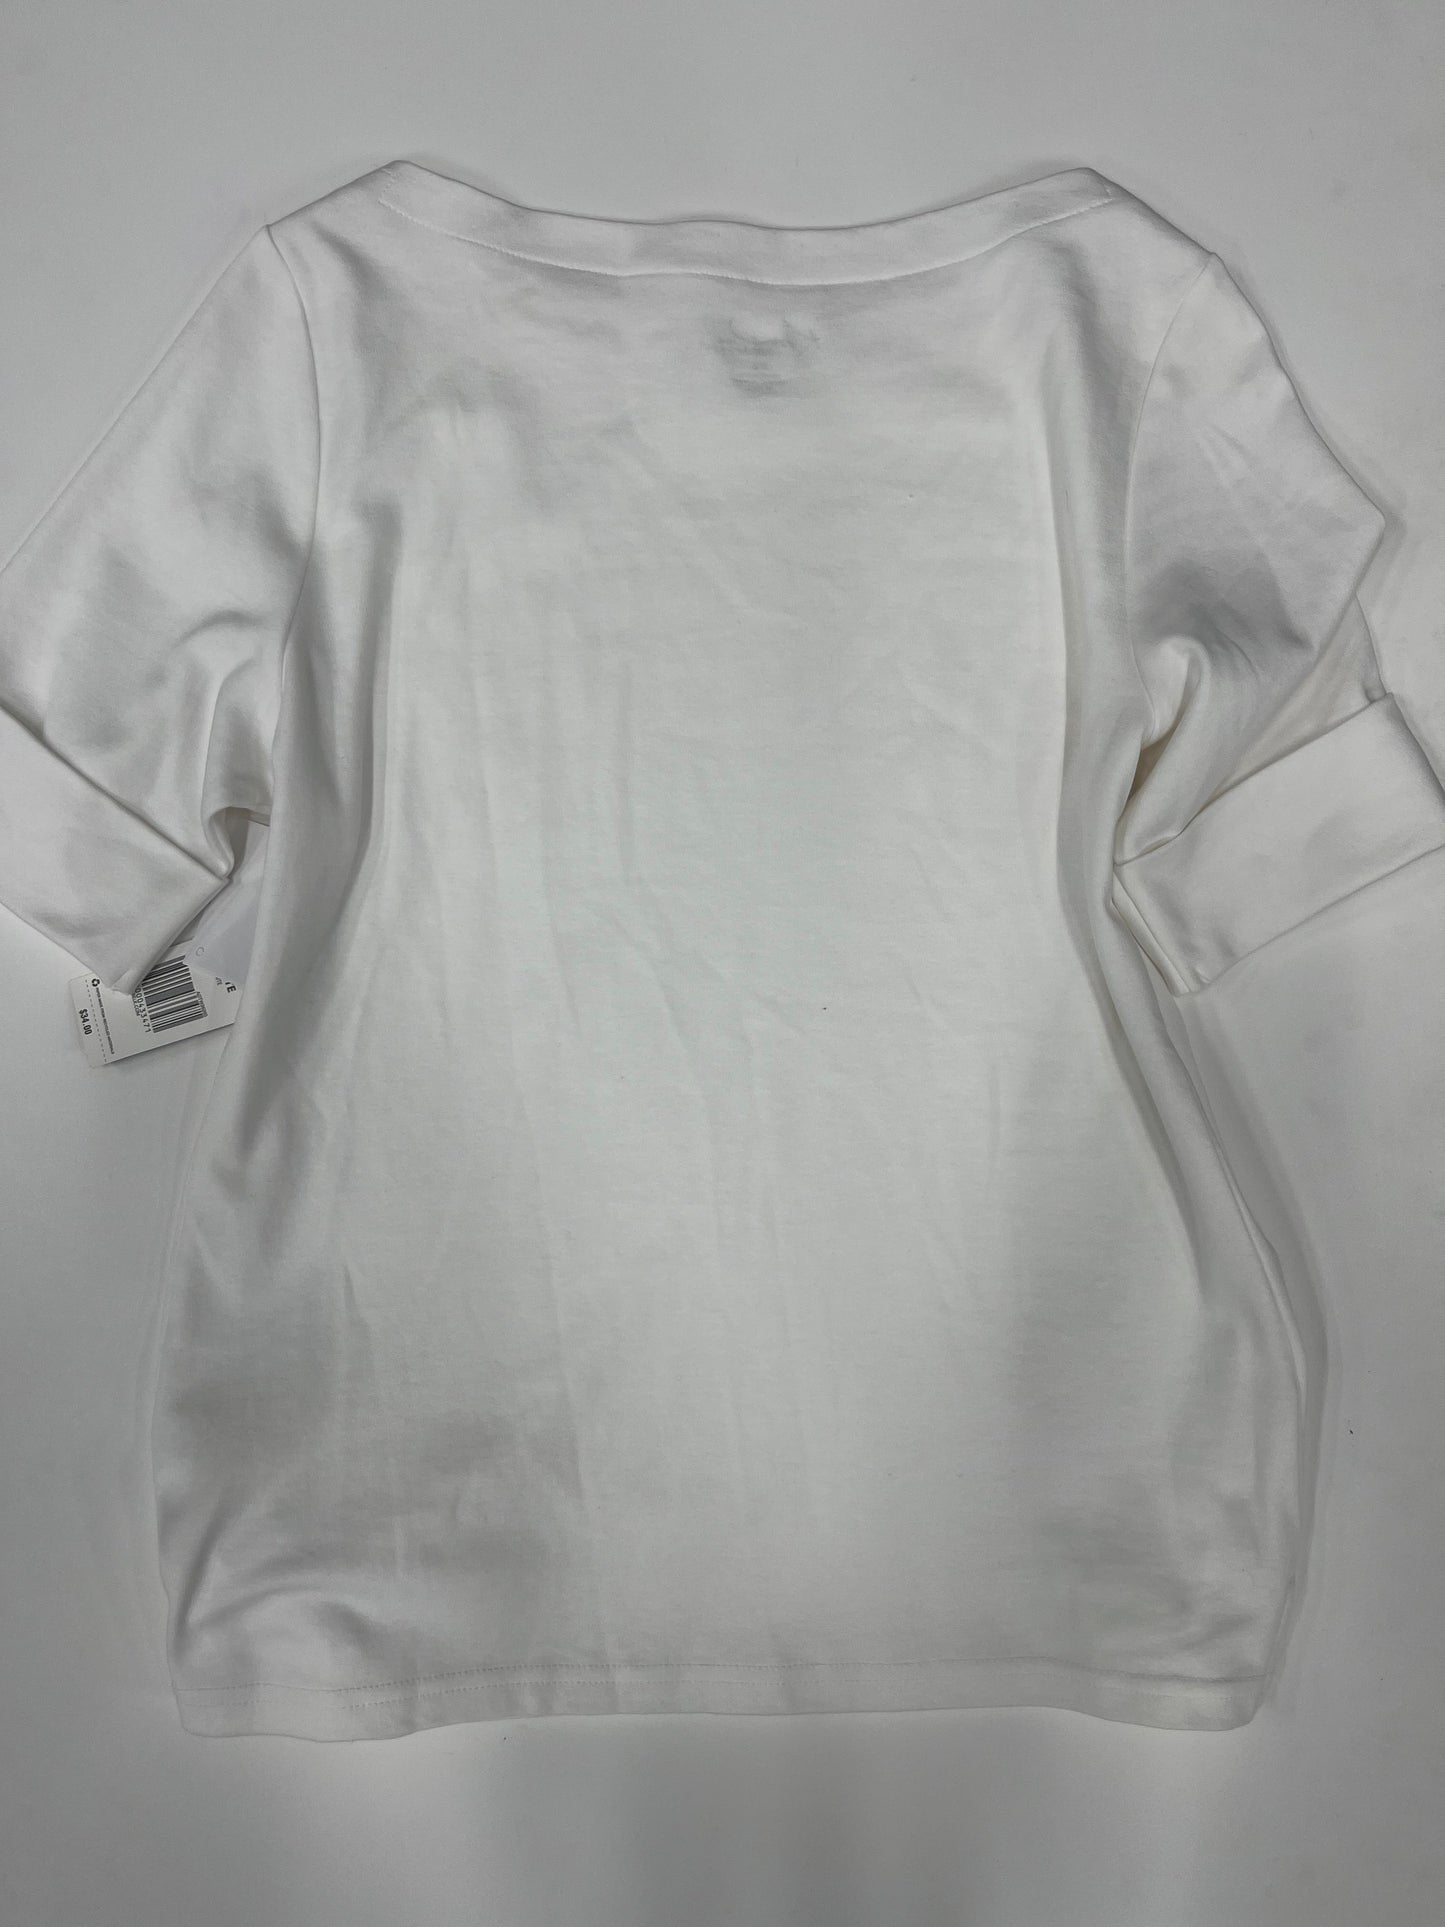 Top Short Sleeve By Kim Rogers NWT  Size: S